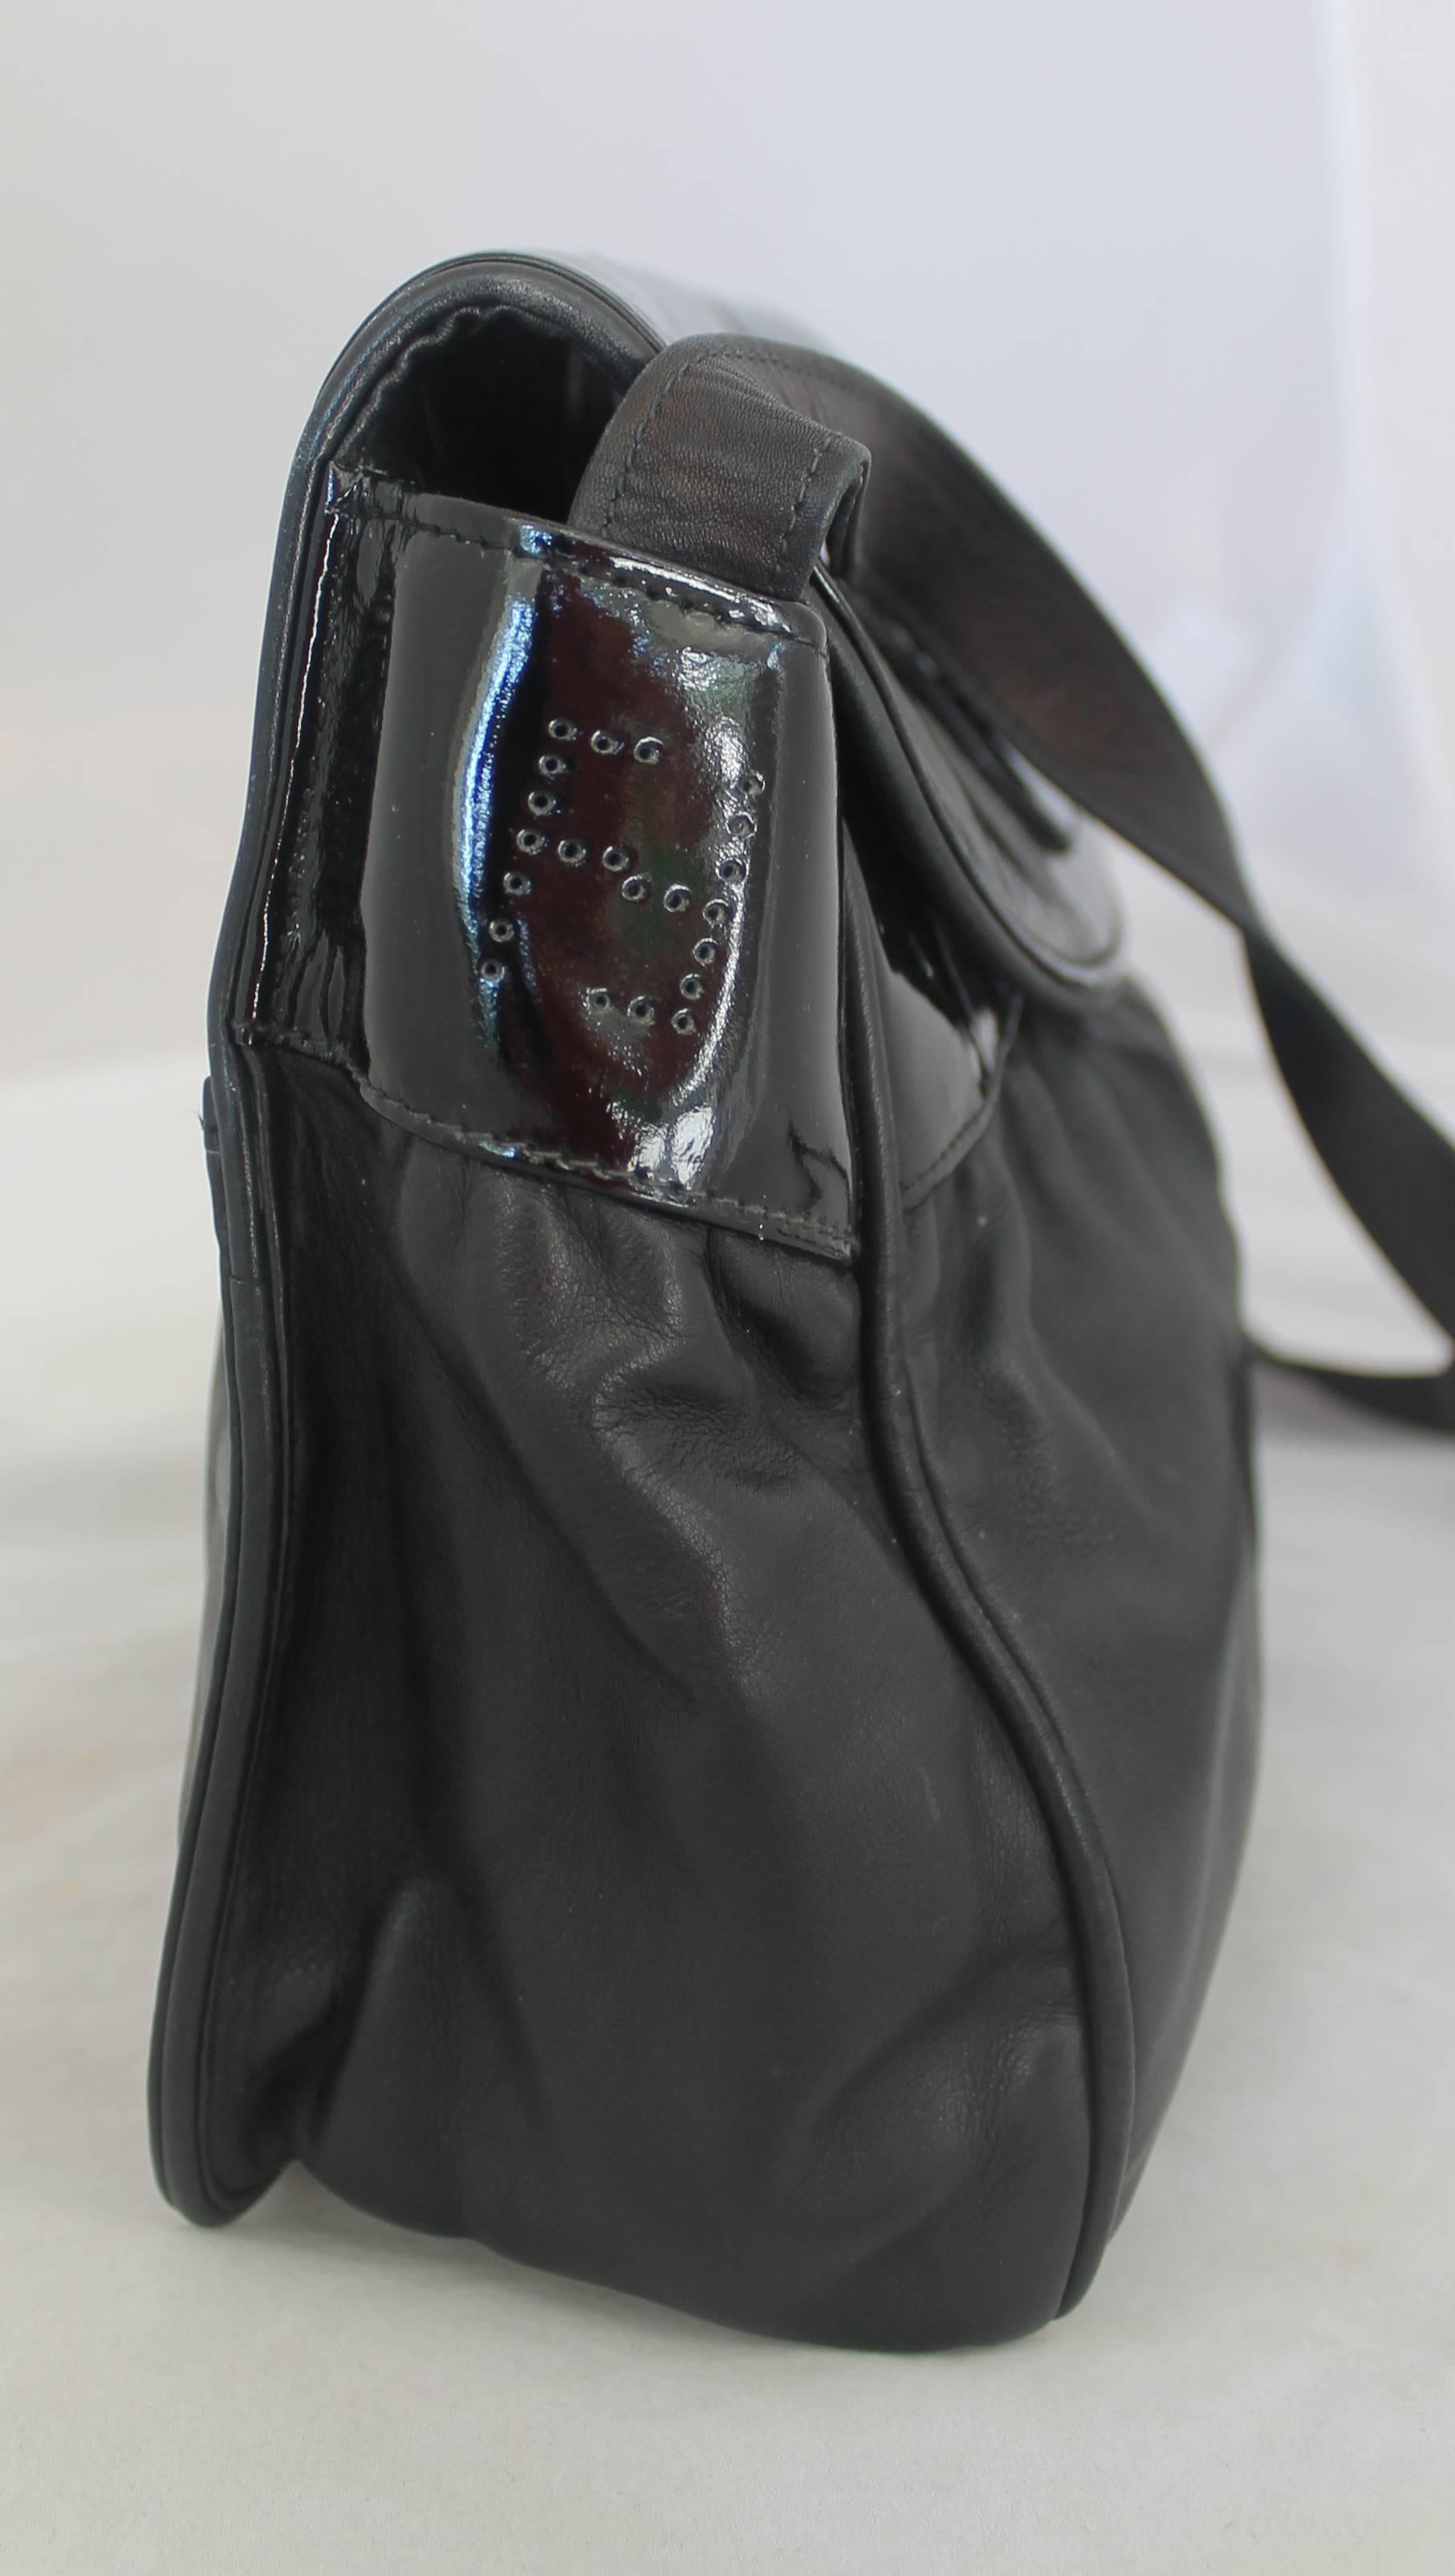 Fendi Vintage Black Leather & Patent Crossbody - Circa 1990's In Good Condition For Sale In West Palm Beach, FL